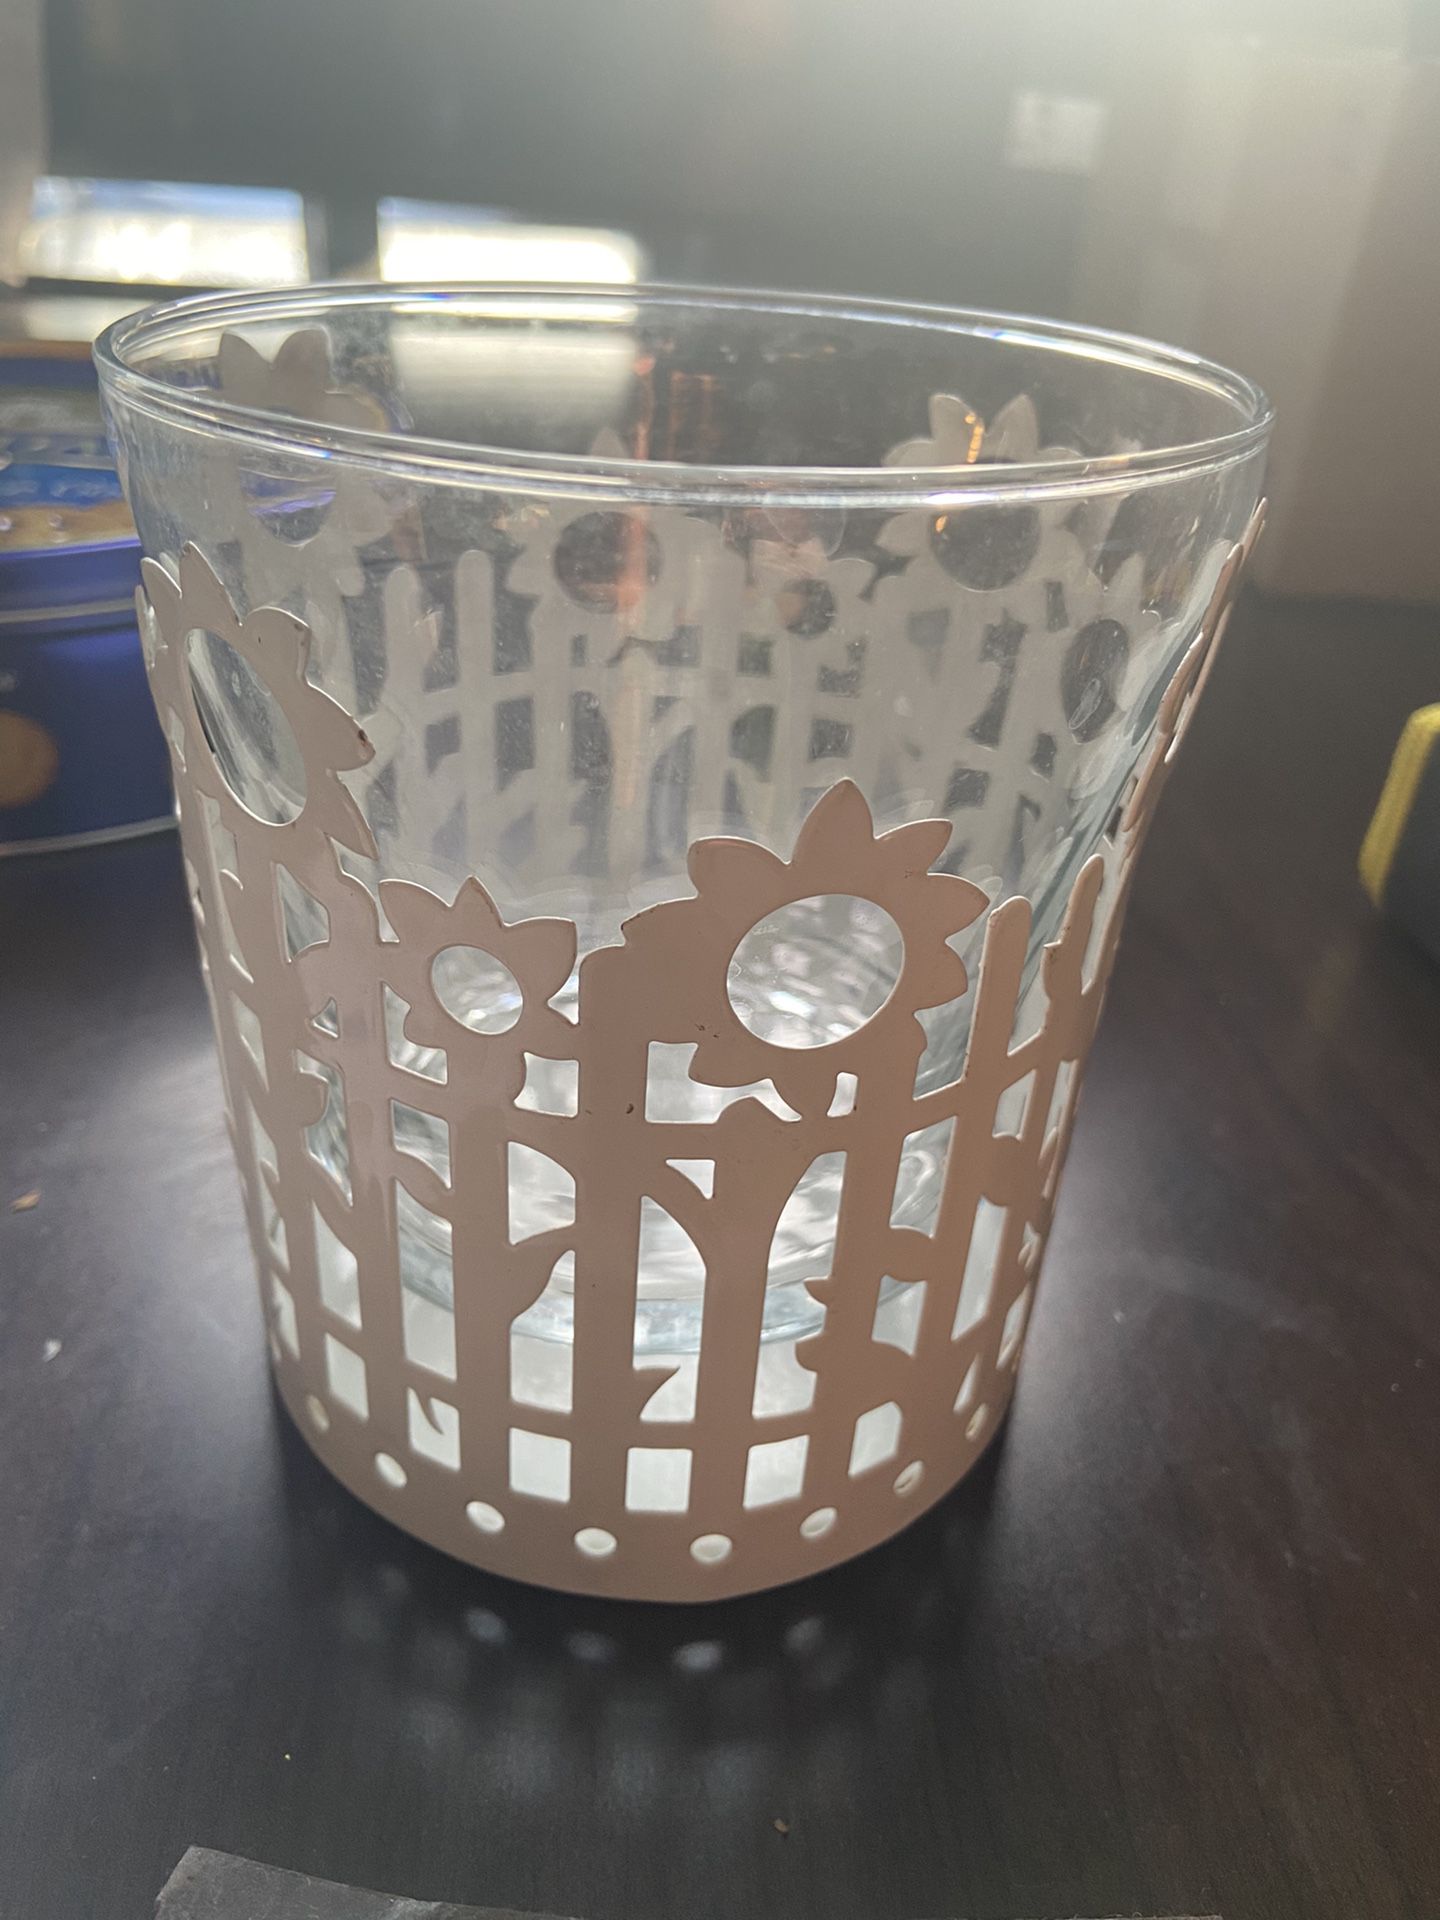 Little Plant Or Candle Holder Fixture $3